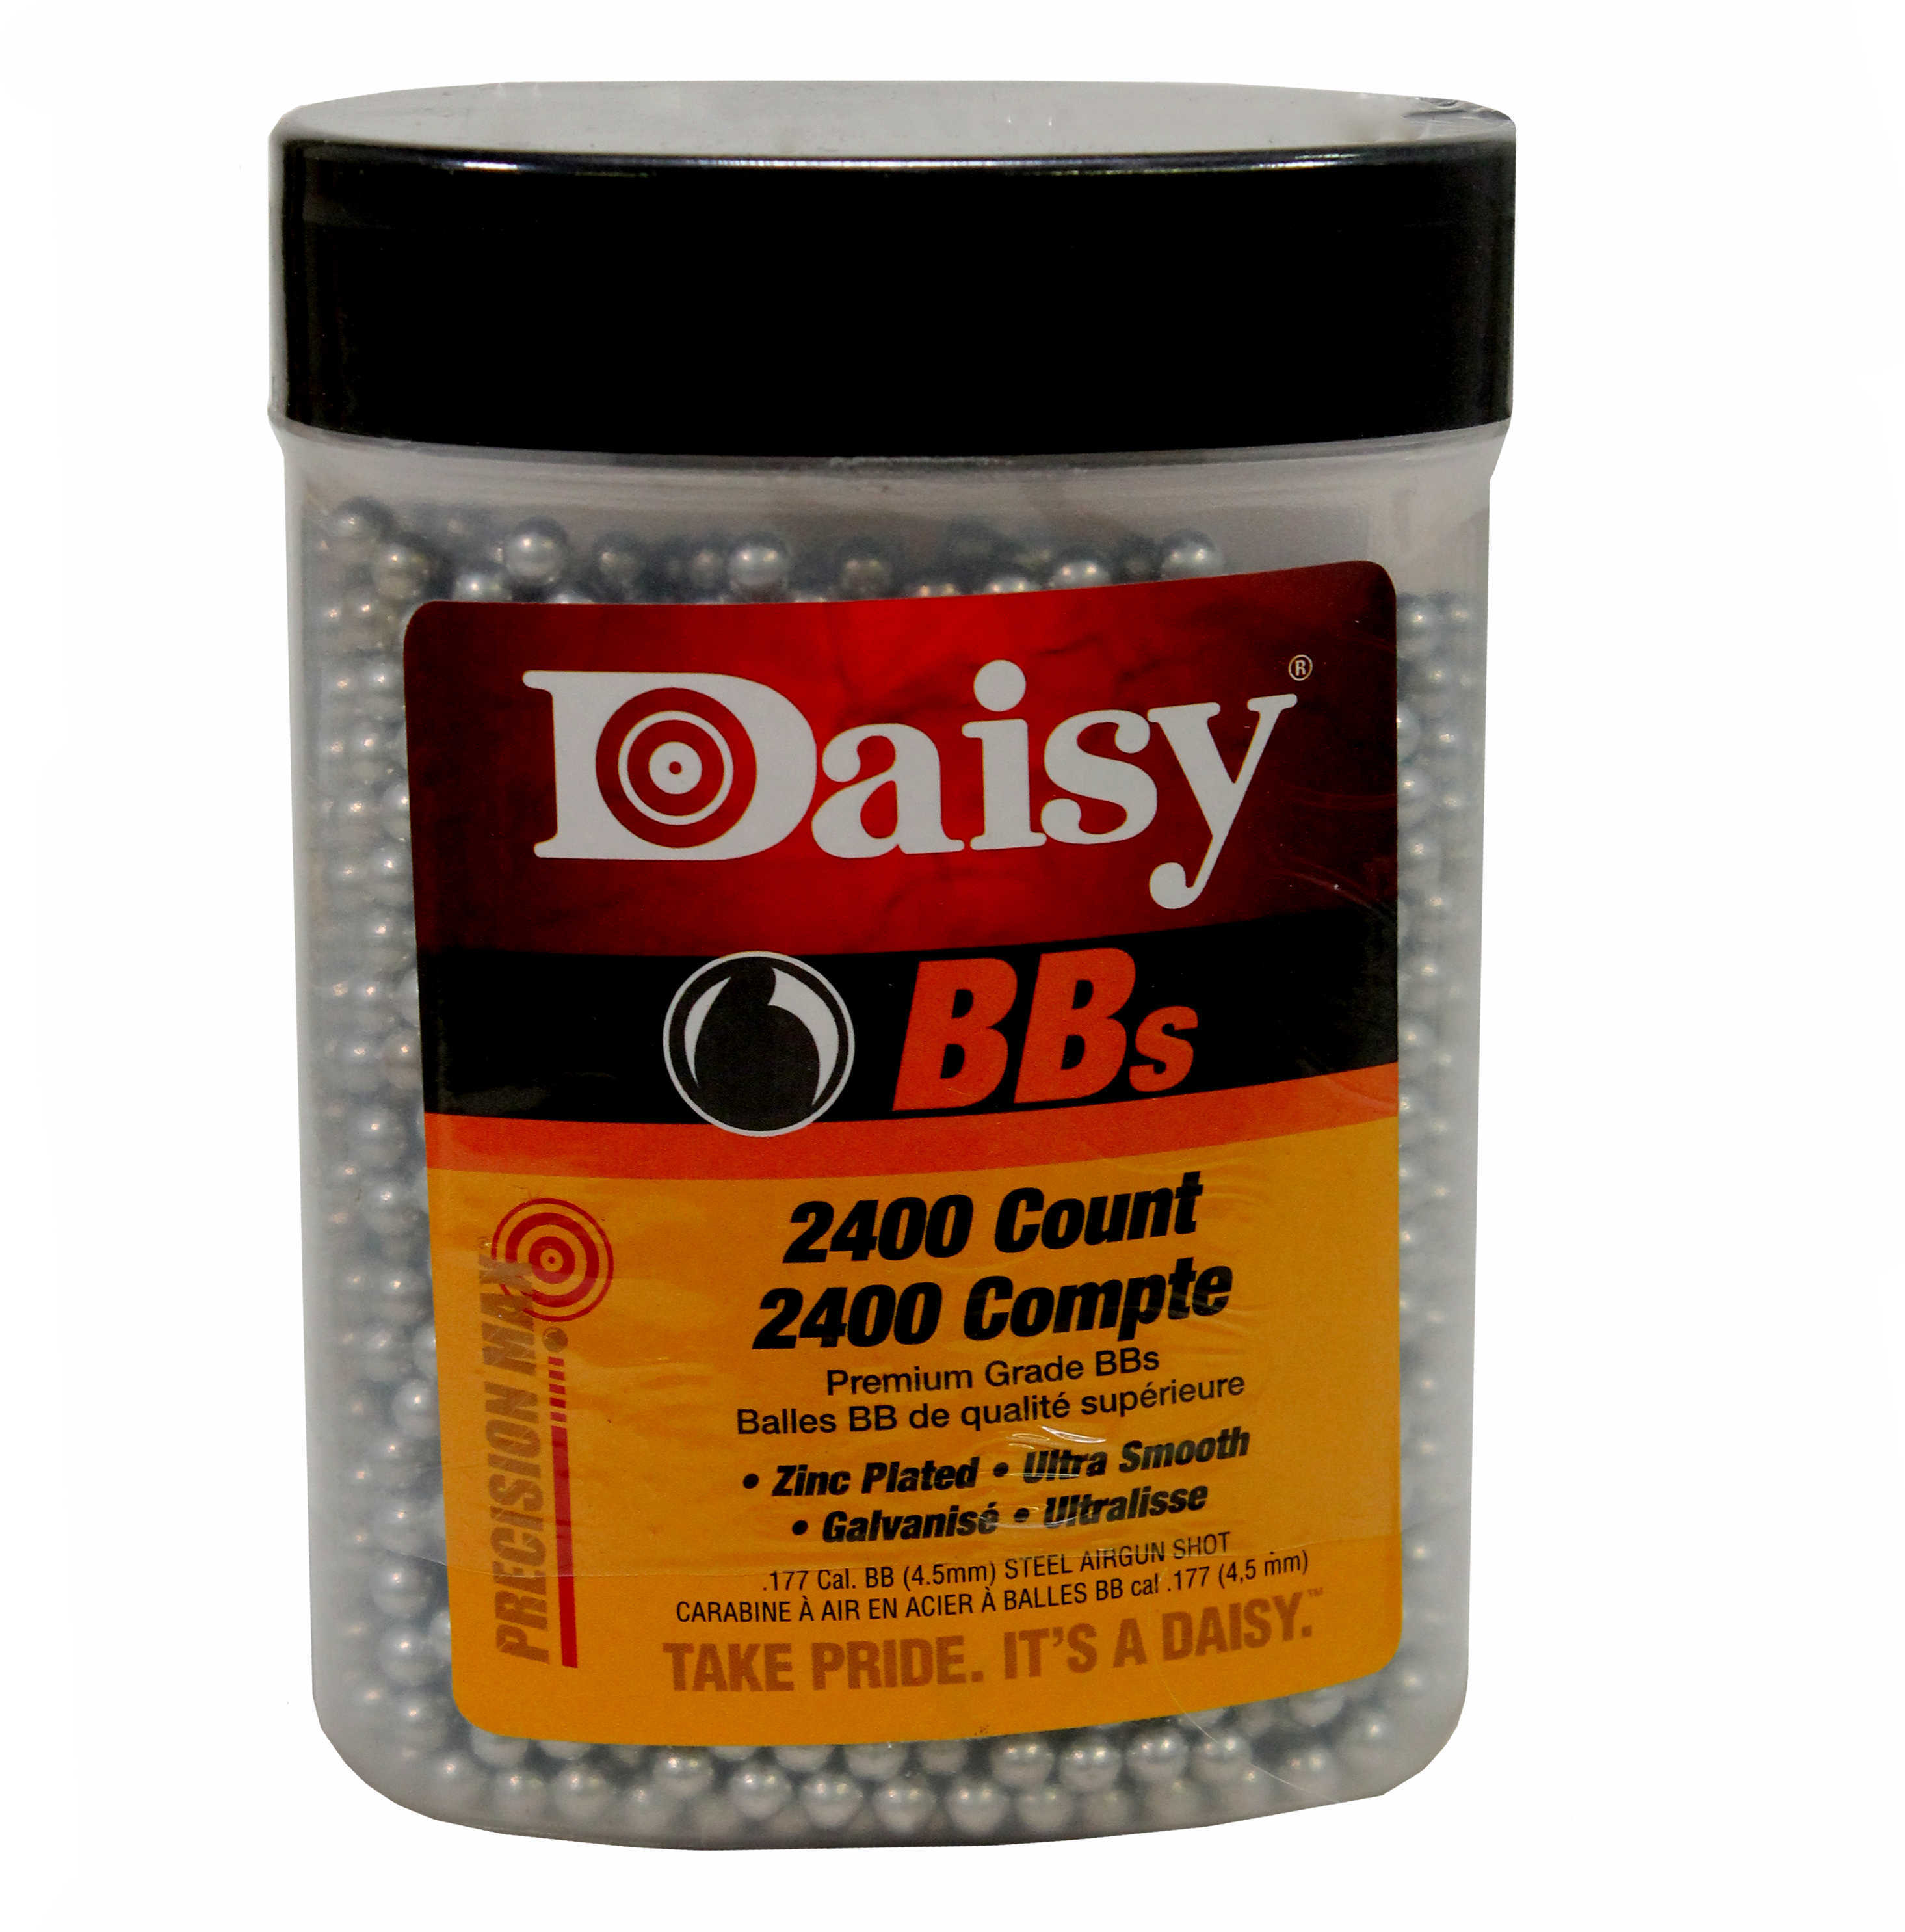 Daisy Outdoor Products Pdq Bbs 2400ct